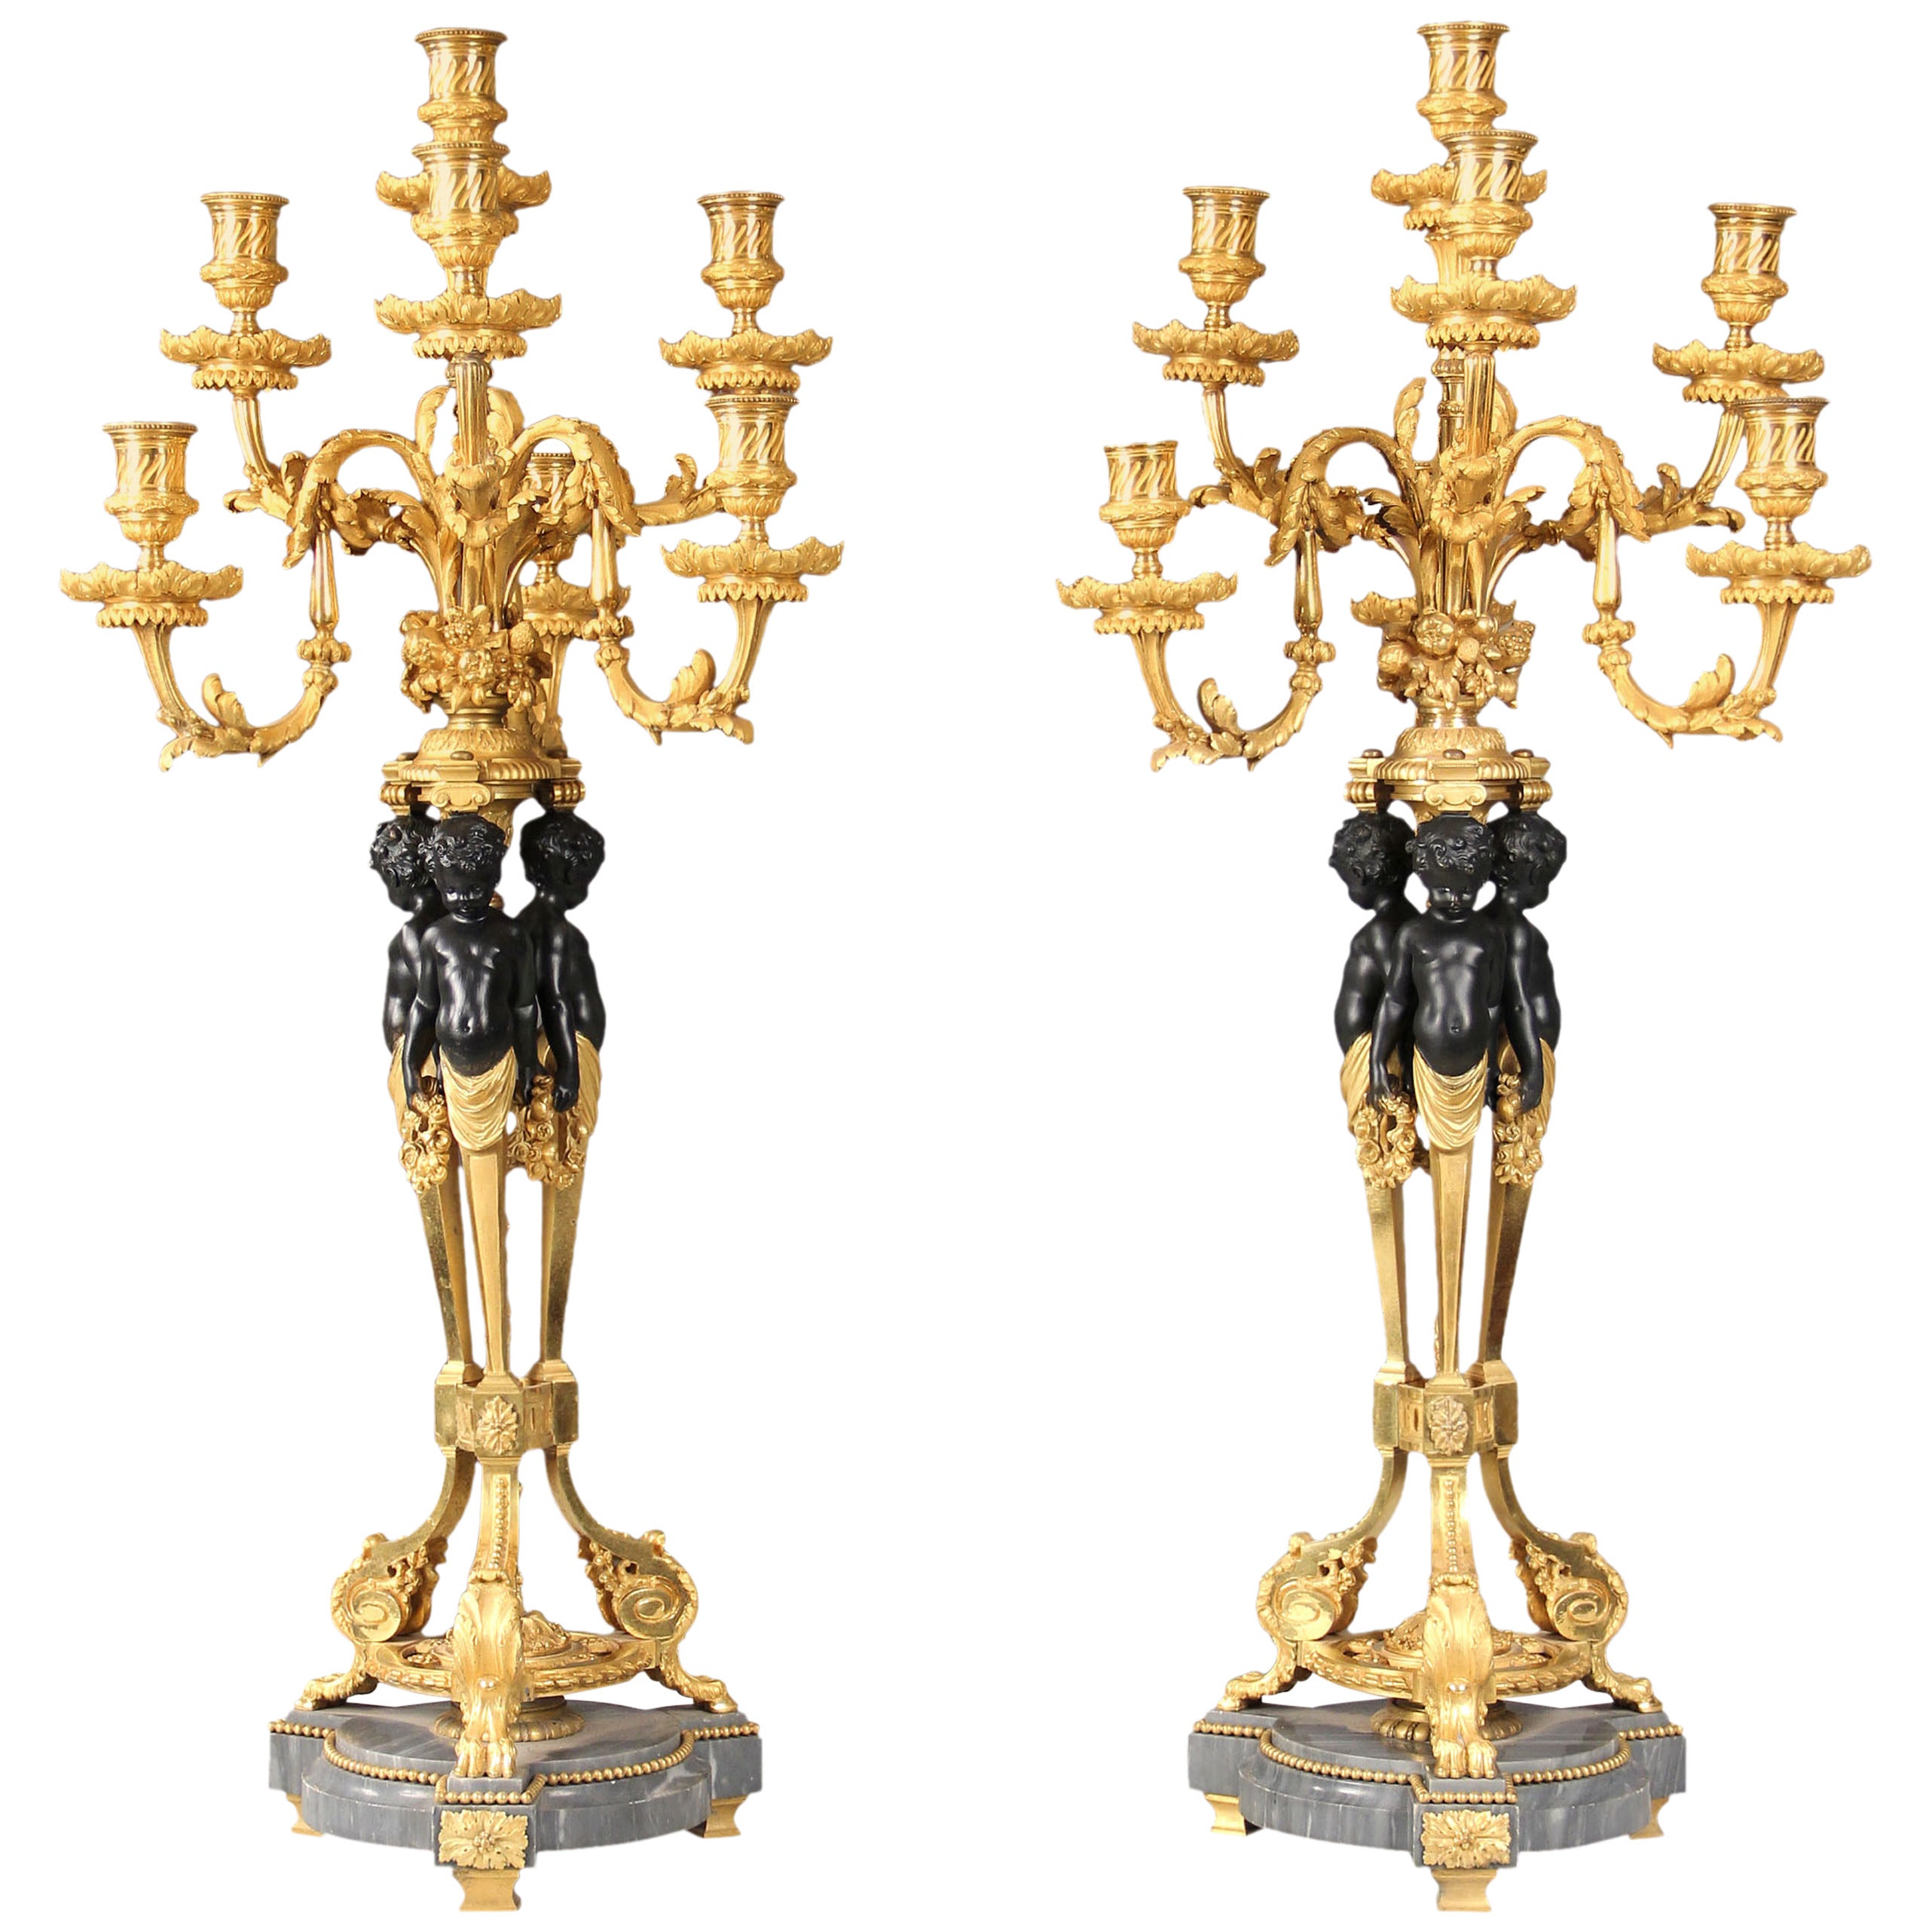 Pair of Late 19th Century or Early 20th Century Seven-Light Candelabra